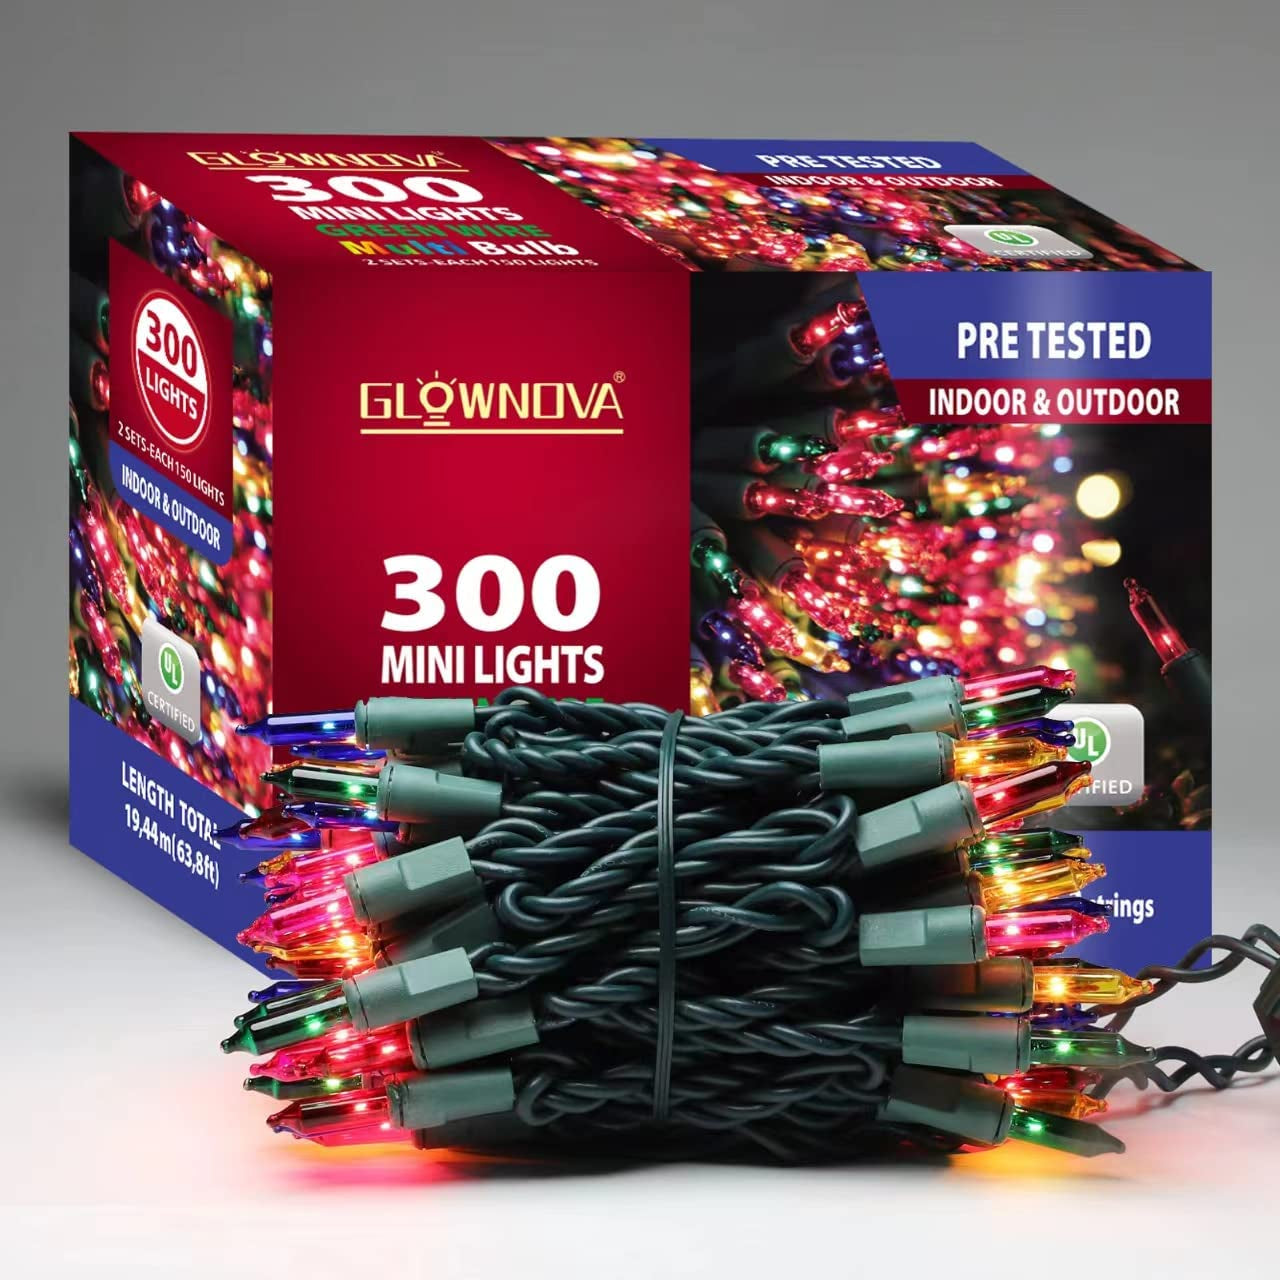  Patriotic String Lights, 100 Count 19.6 FT July 4th Mini White Wire Fairy Lights, 120V UL Certified Connectable Incandescent Independence Day